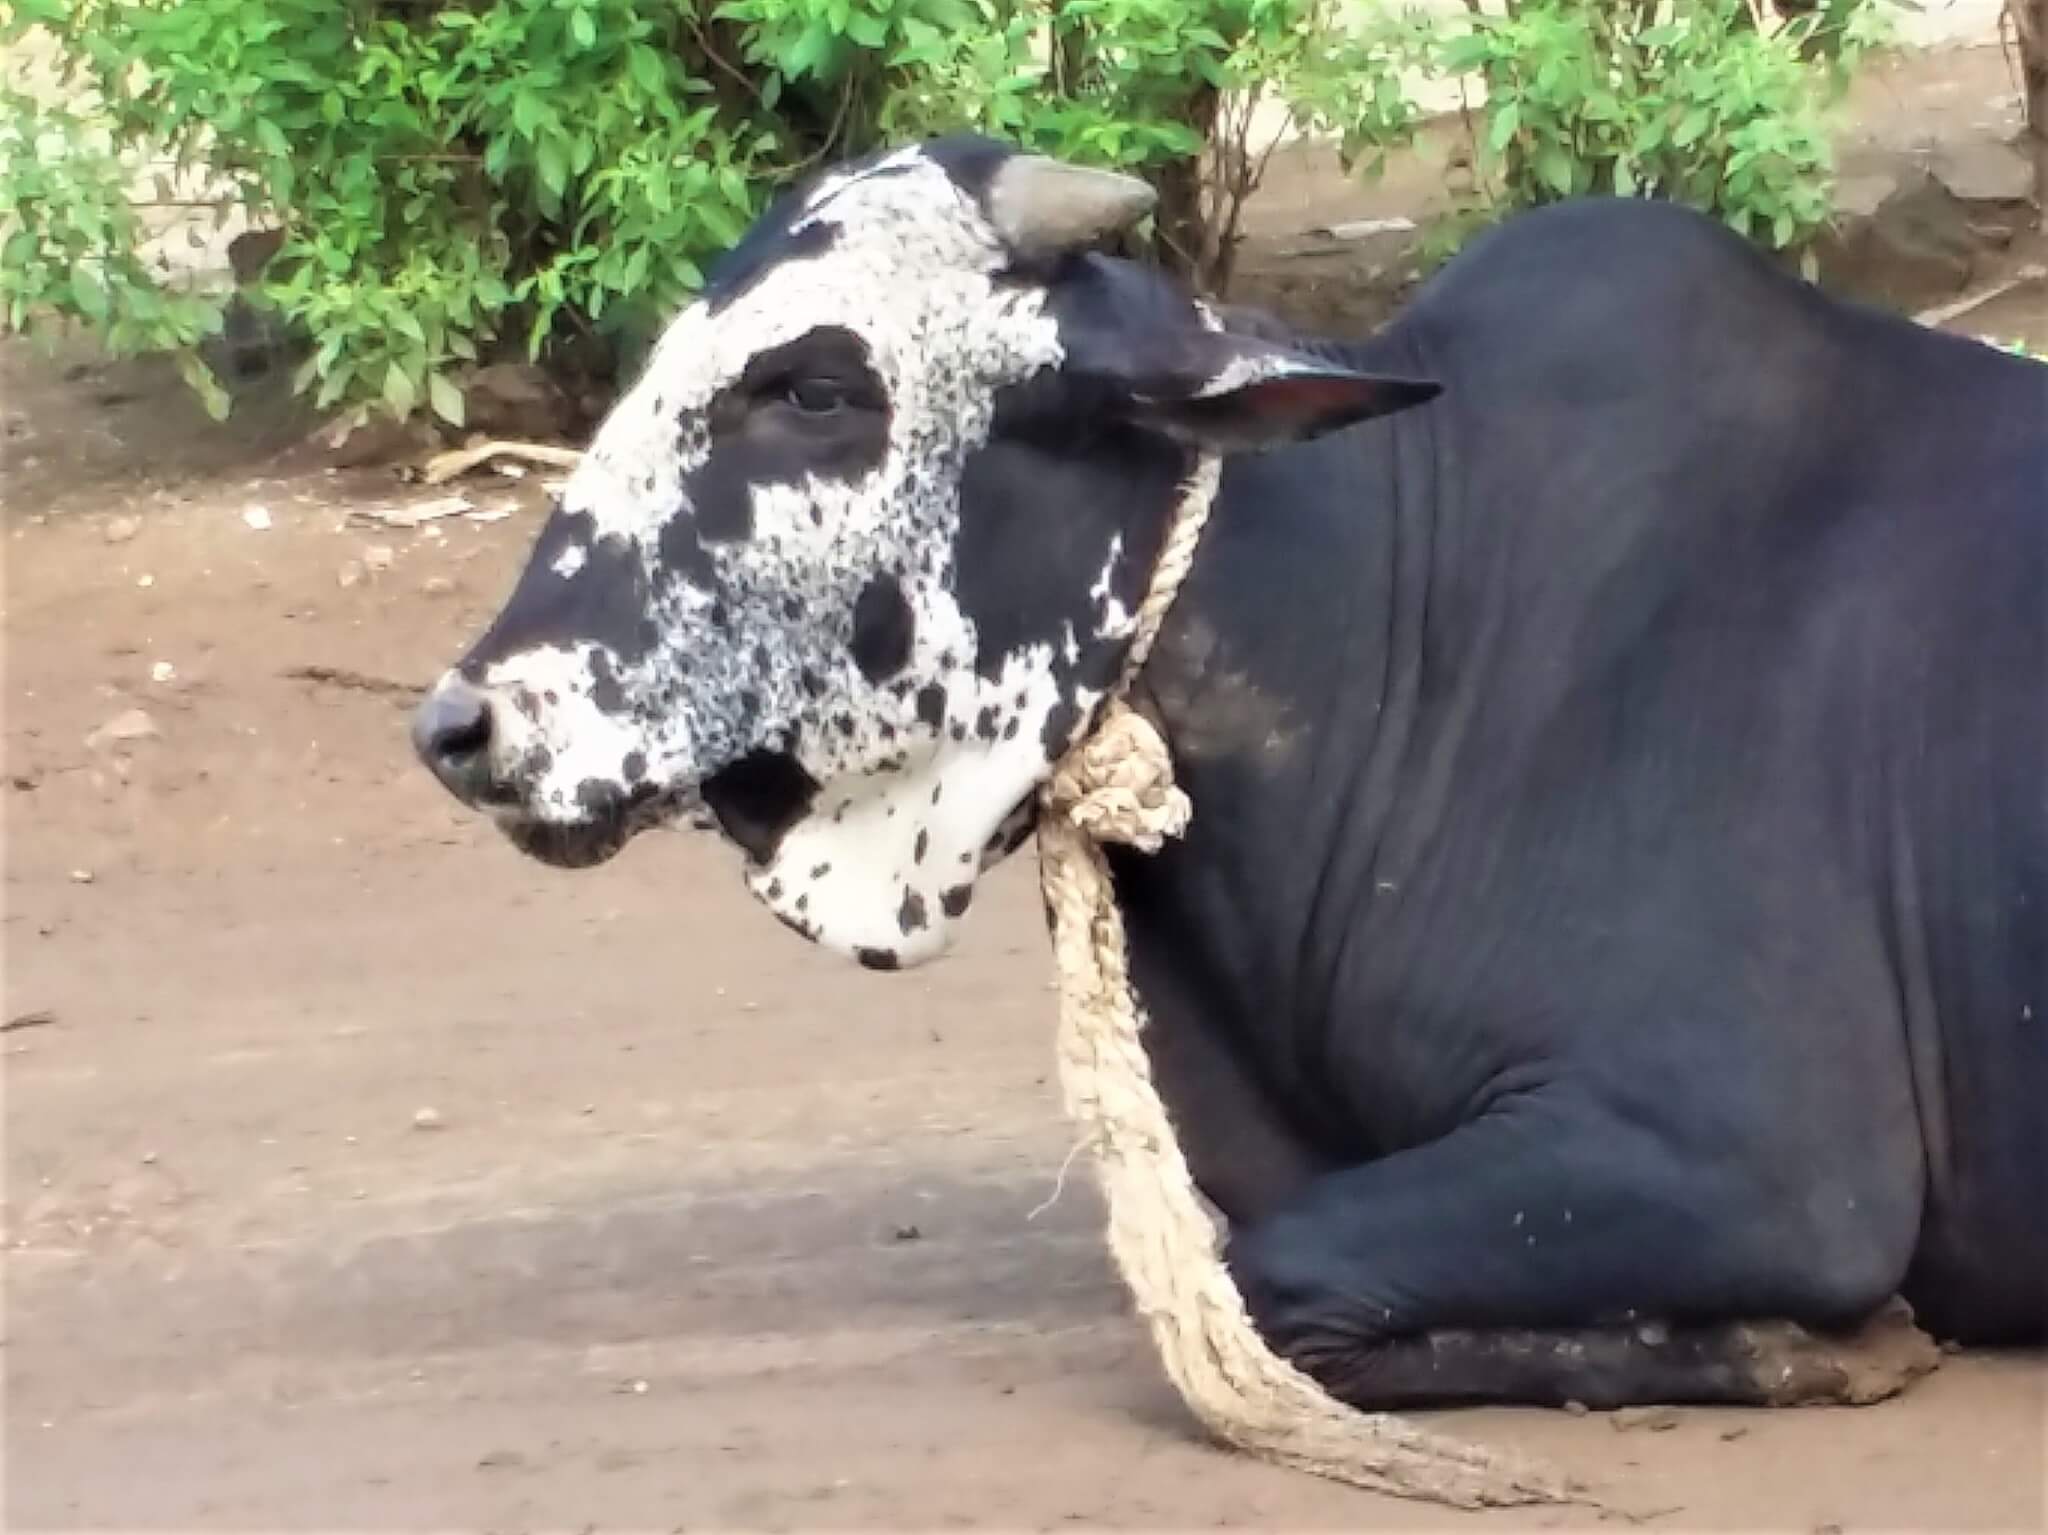 Sahdev sits in the dirt at the roadside with a rope tied tightly around his neck.